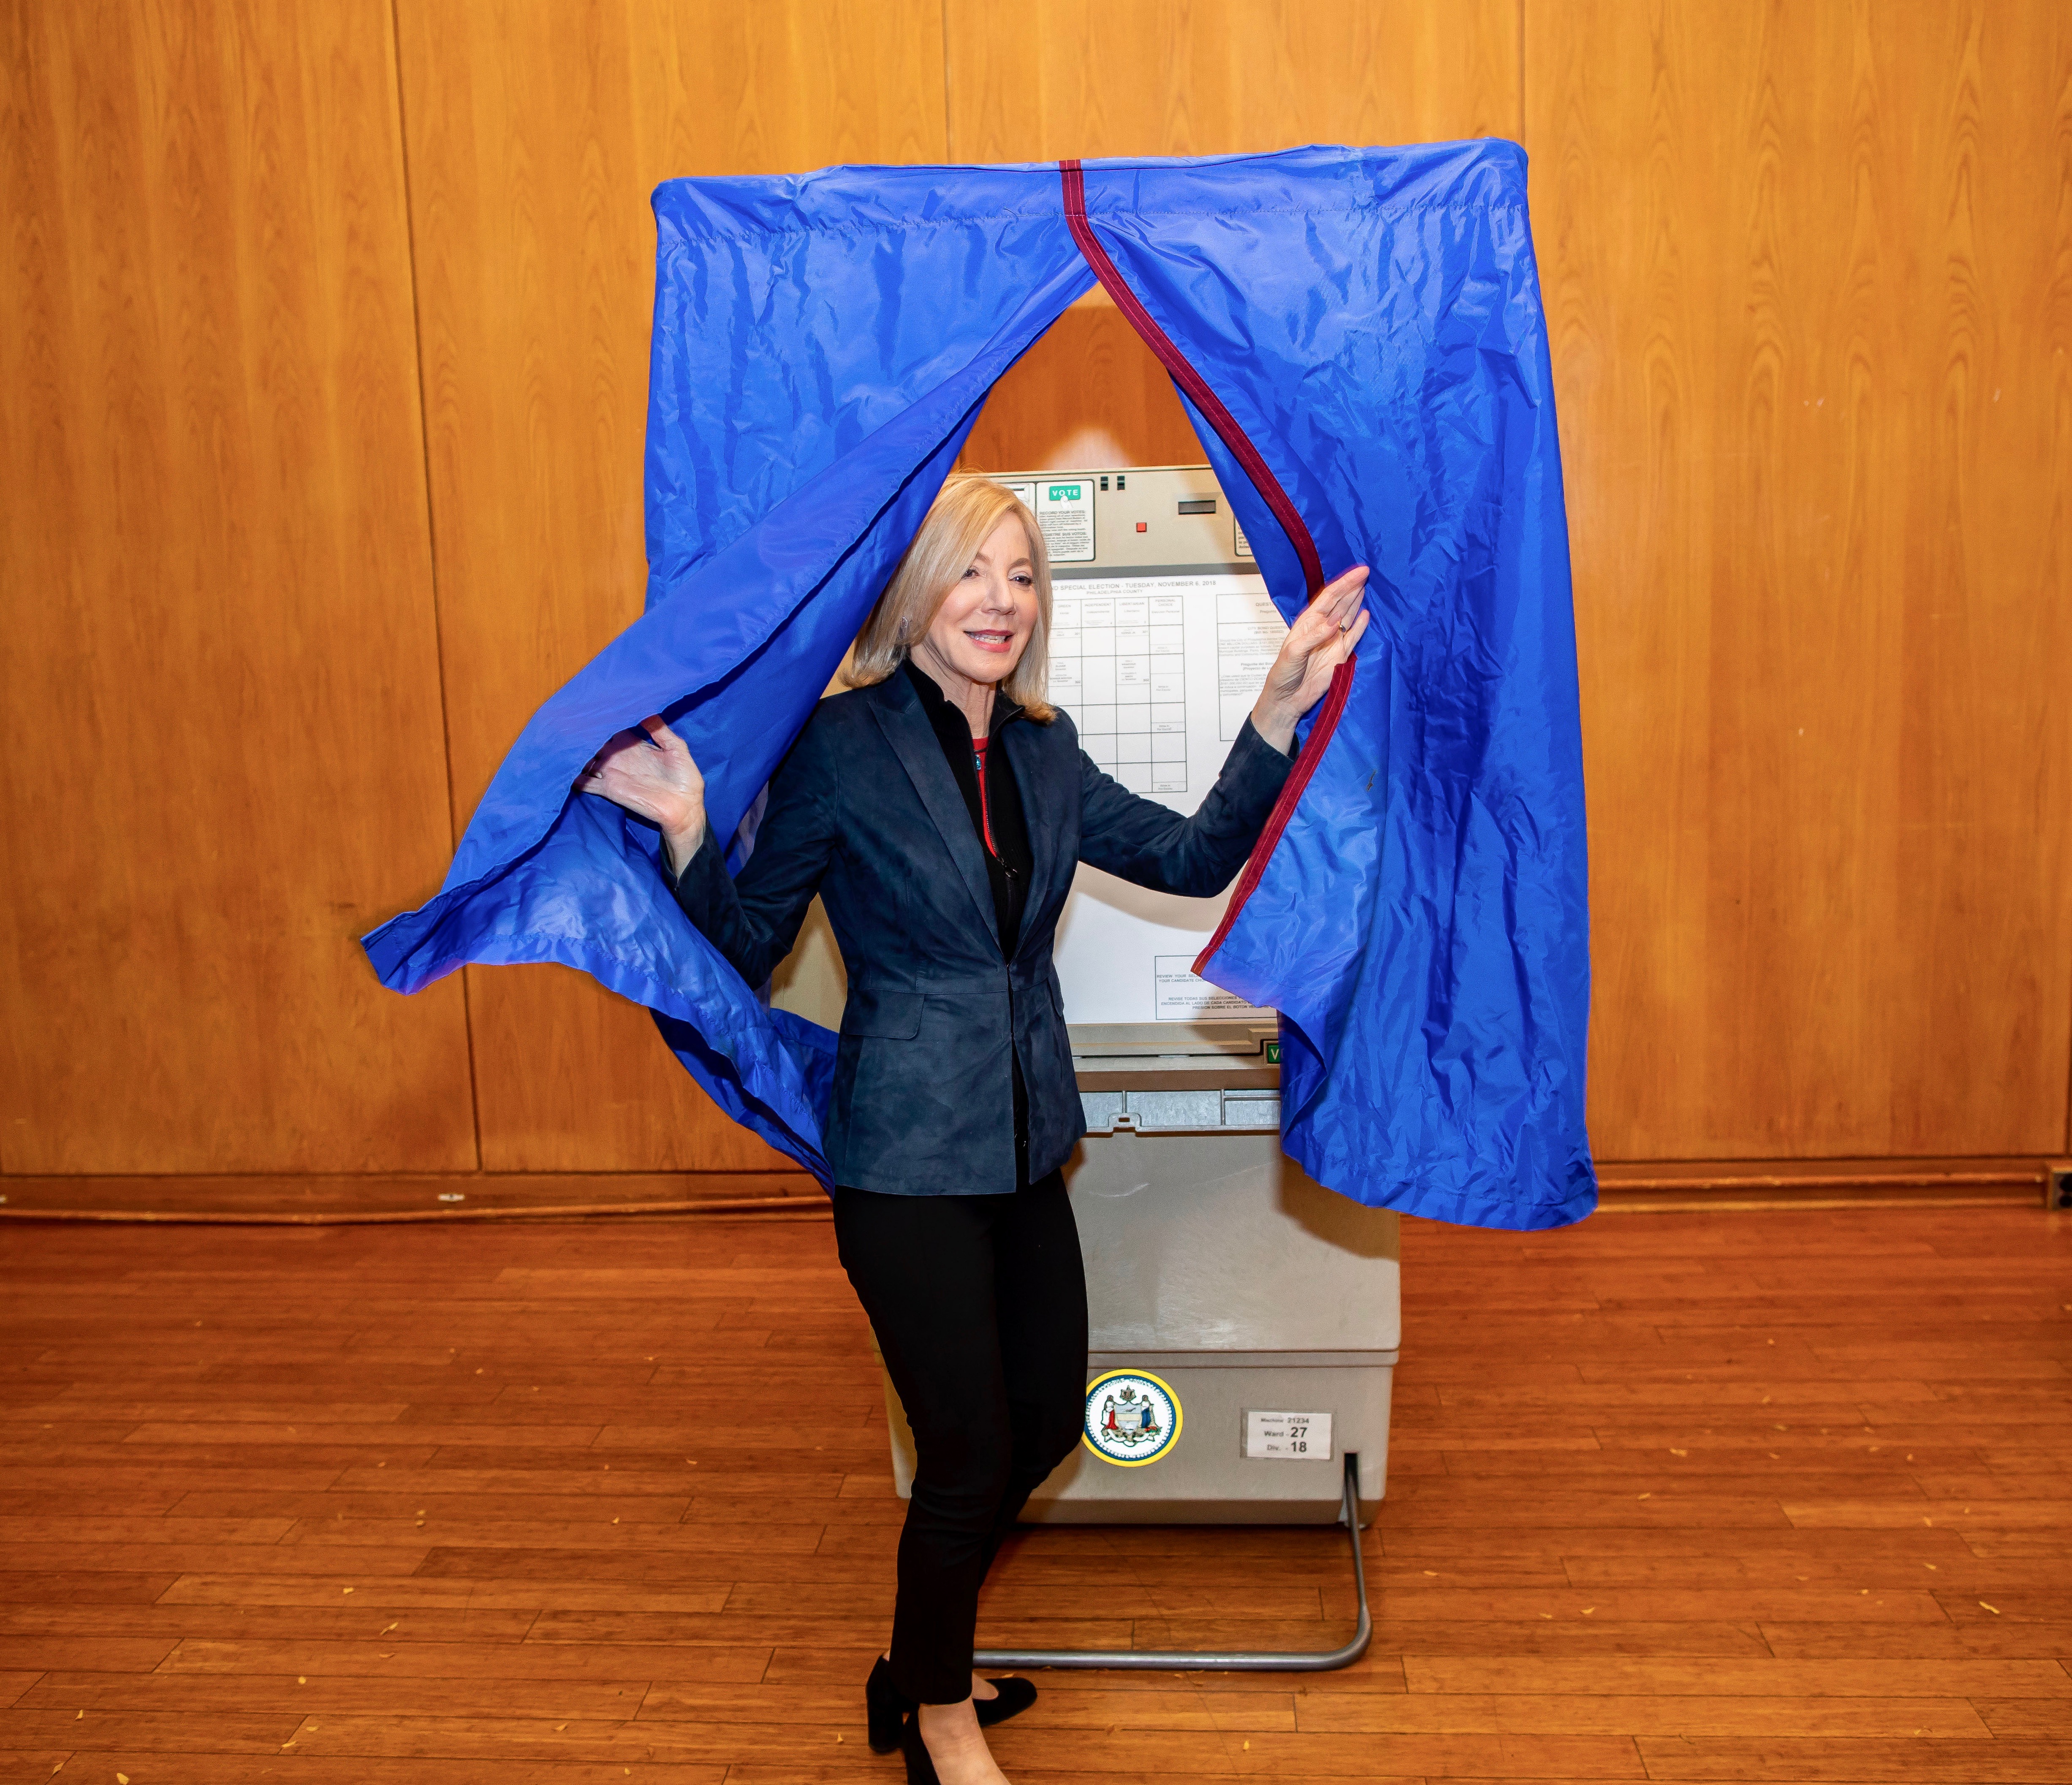 Penn President Amy Gutmann exits the voting booth